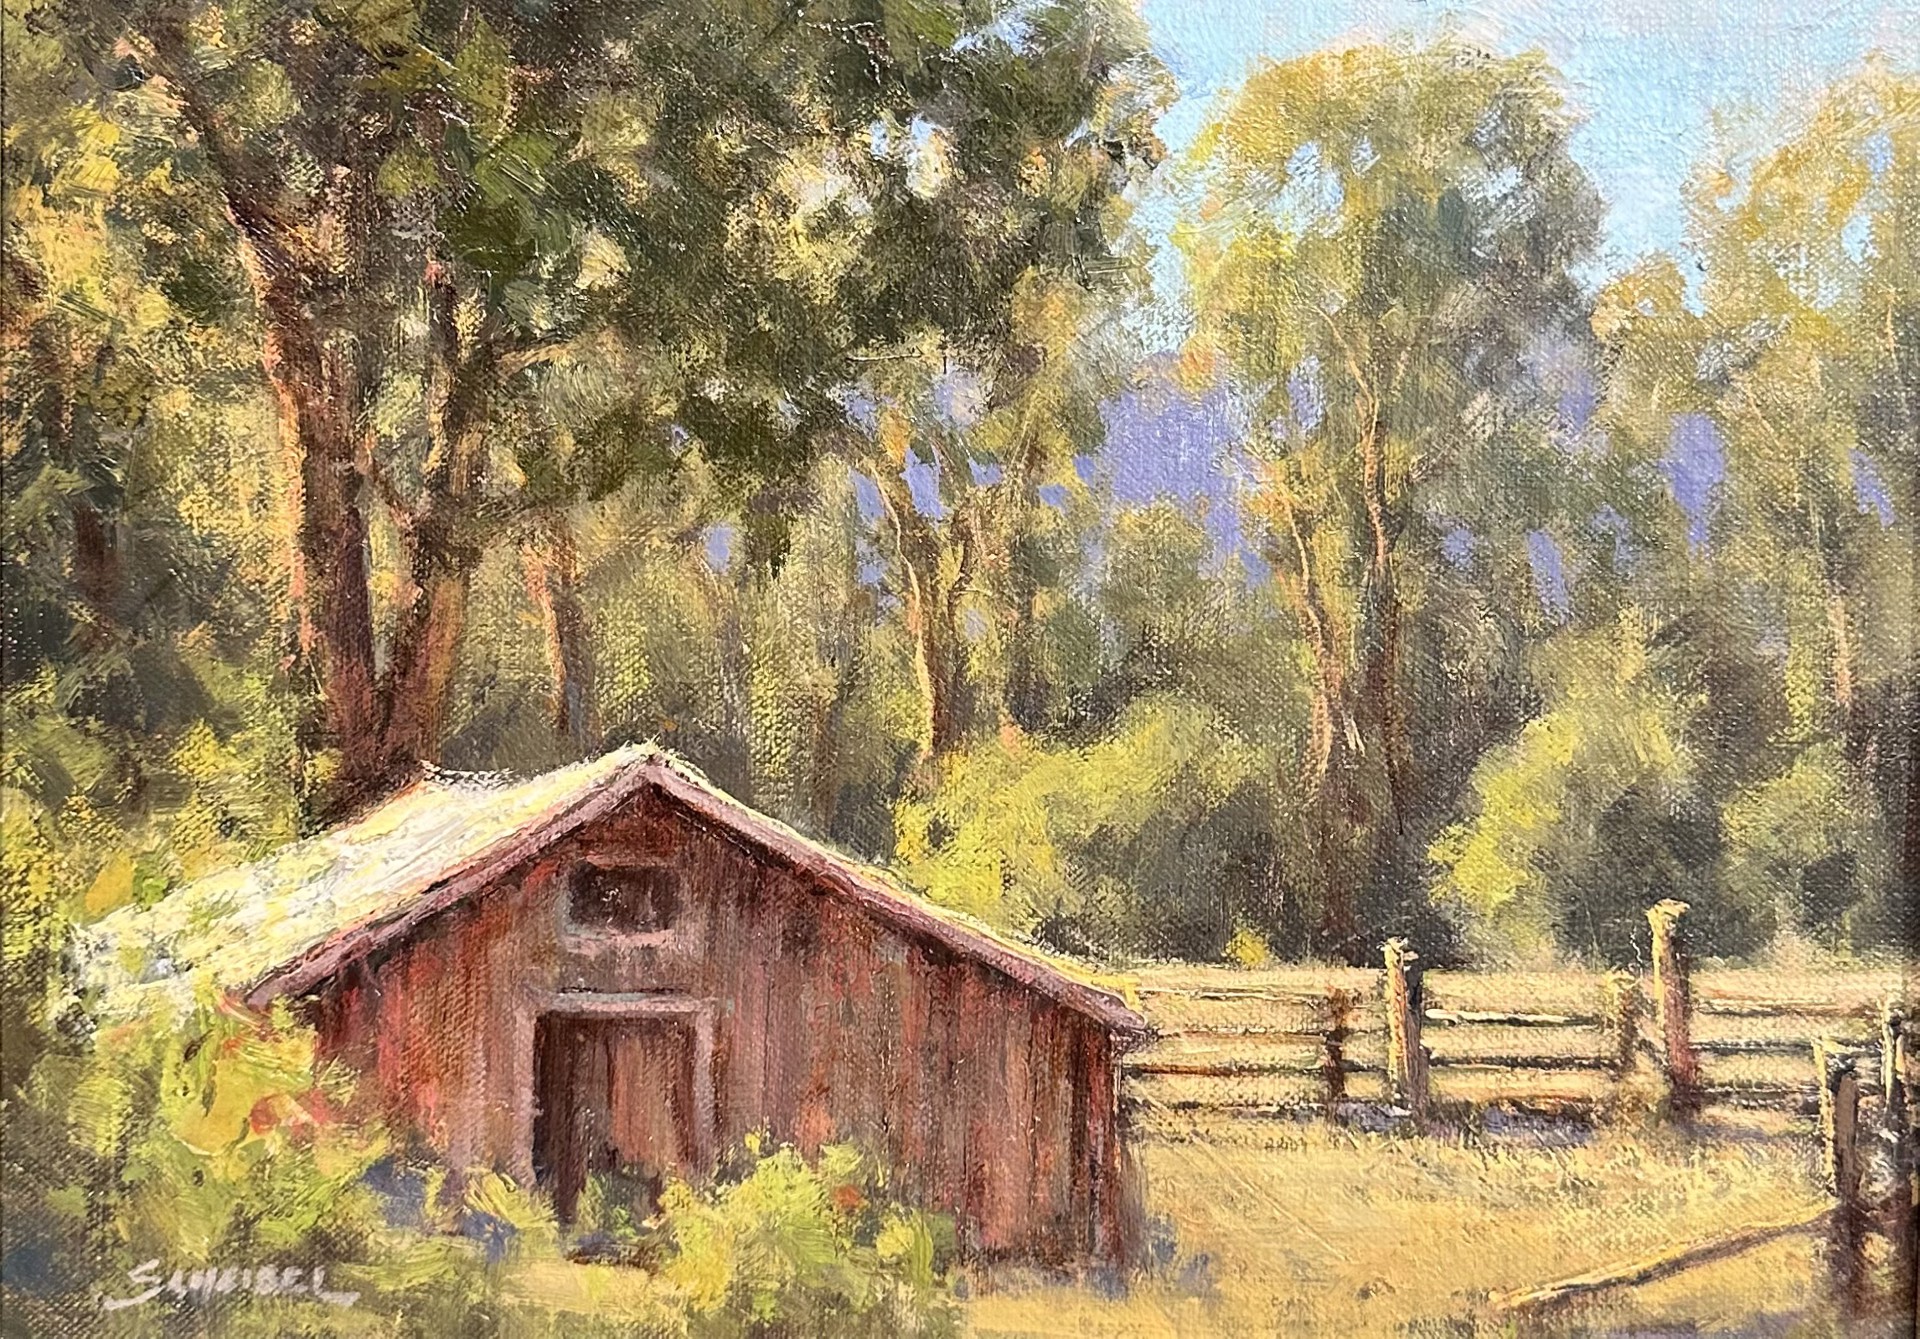 THE OLD RED SHED by Greg Scheibel